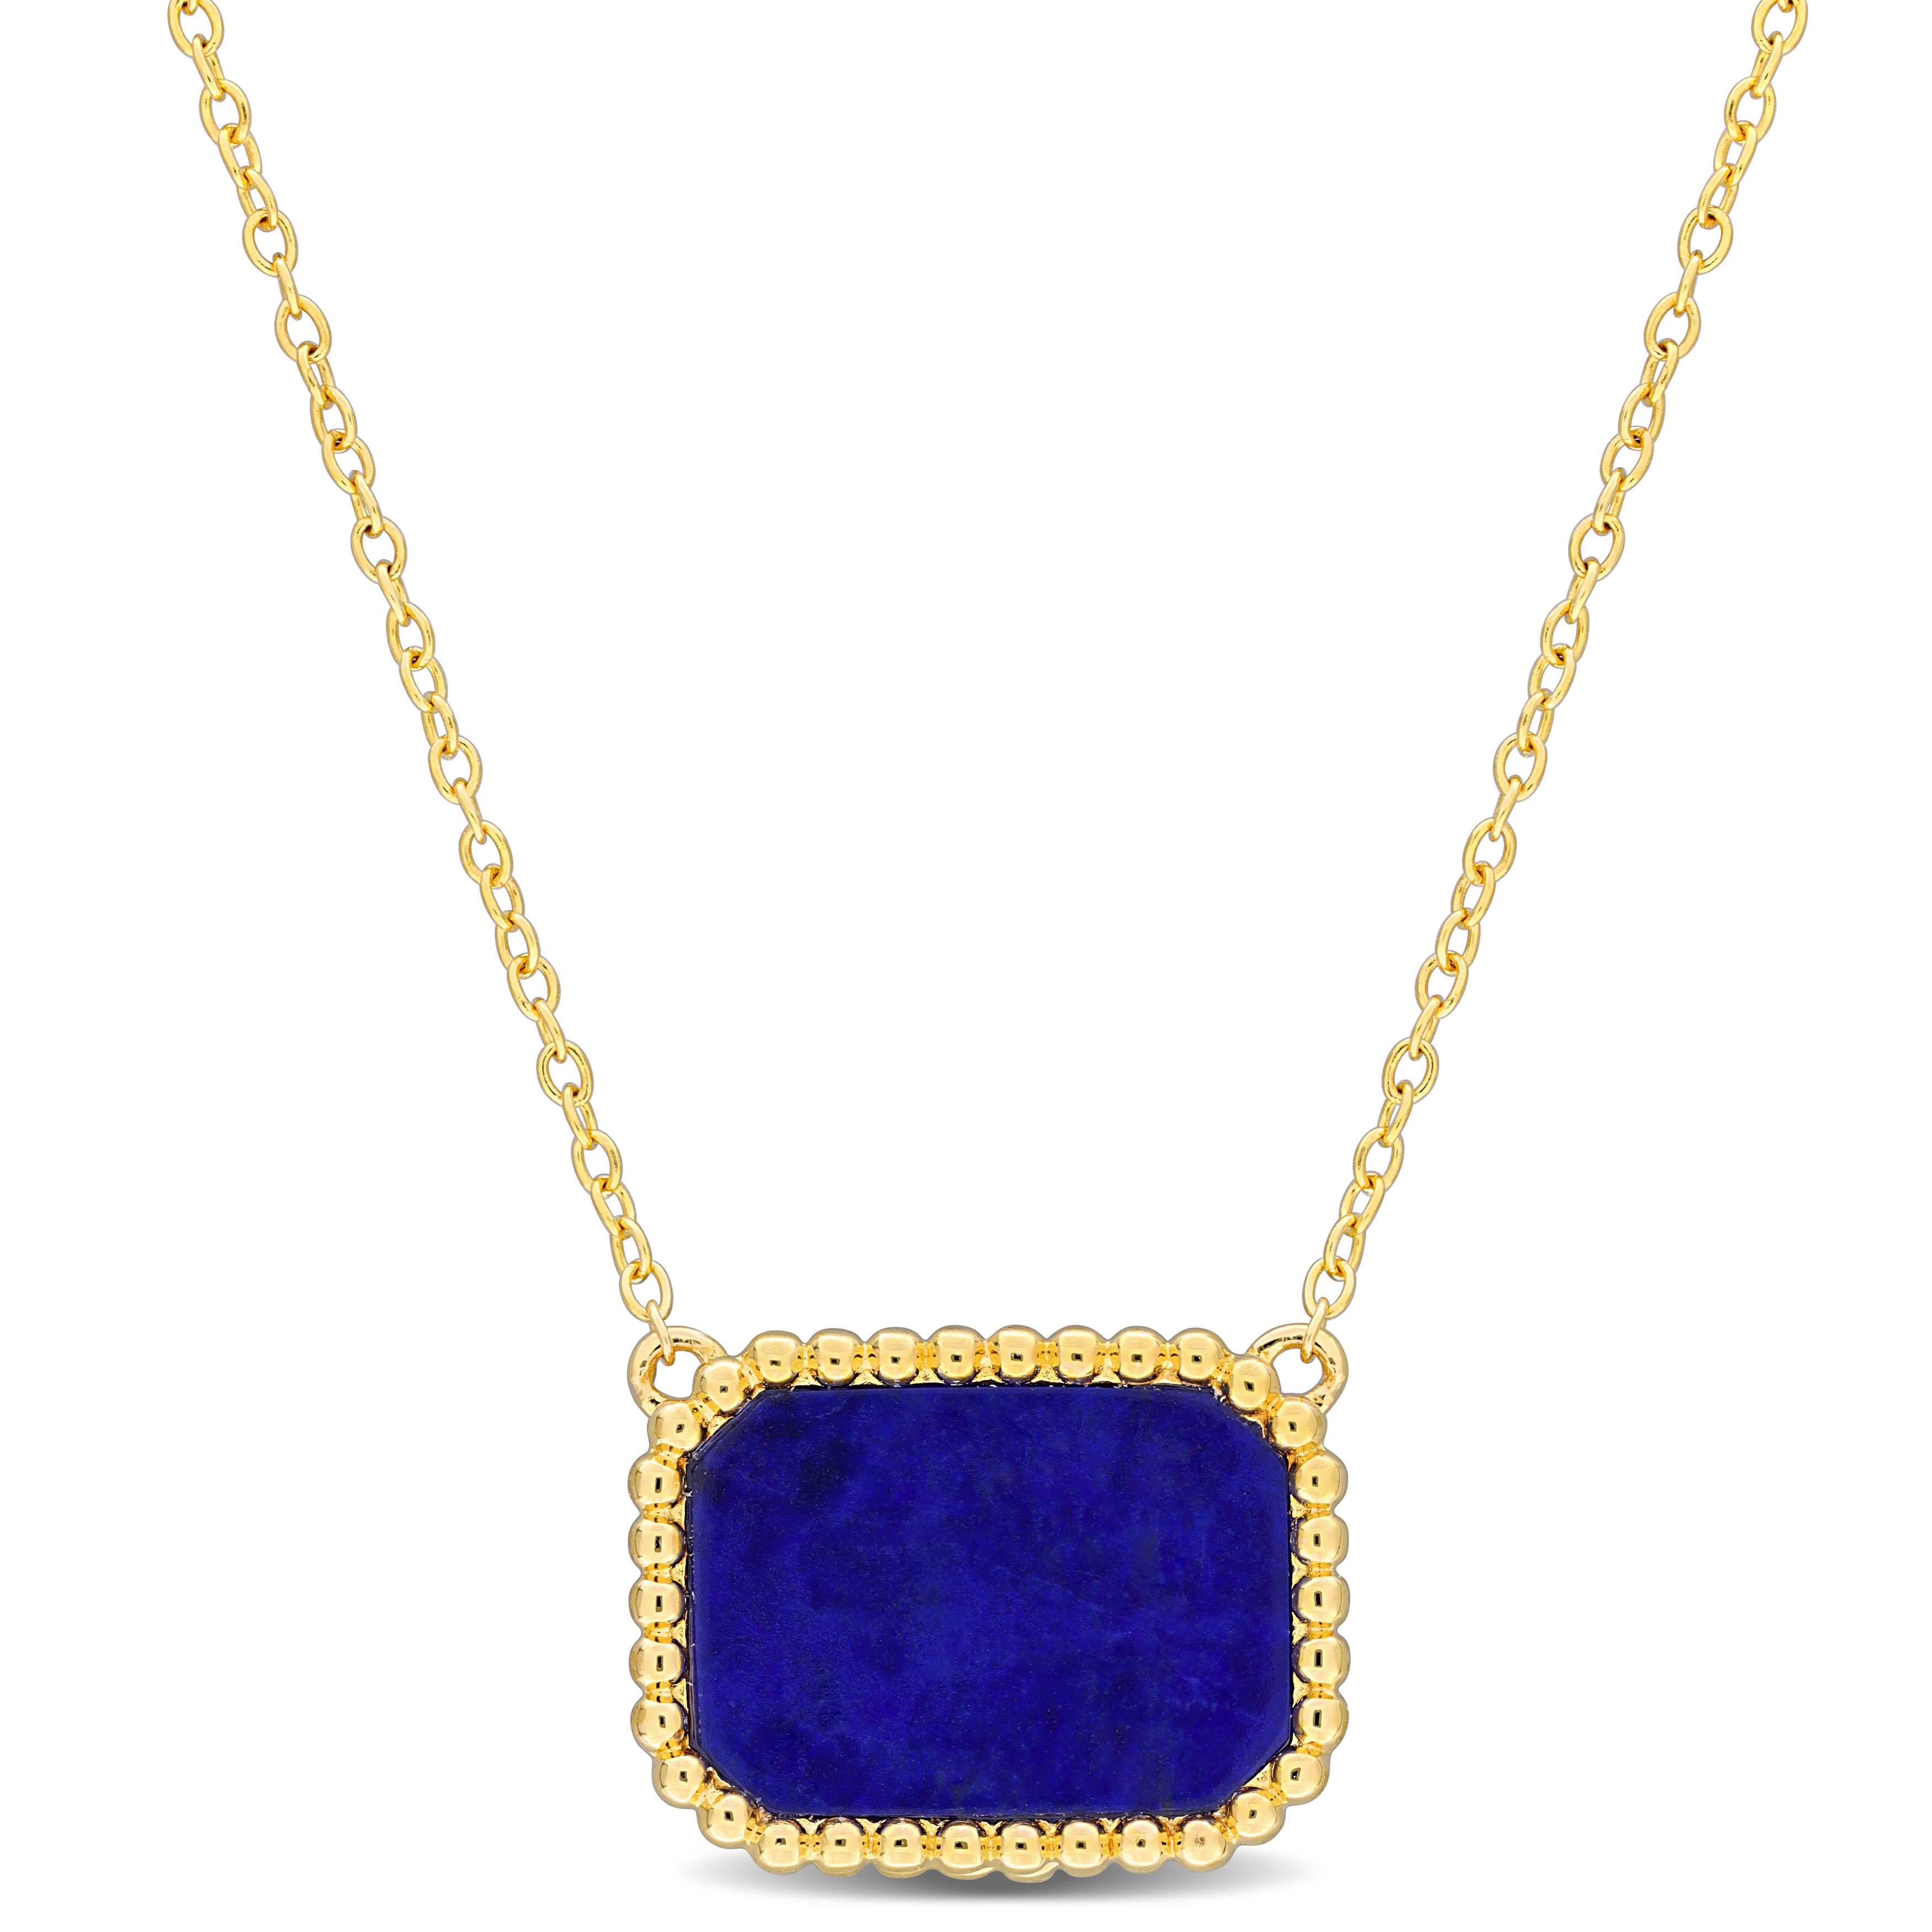 5 CT TGW Octagon Shape Lapis Necklace With Beaded Halo in Yellow Plated Sterling Silver - 17 in.